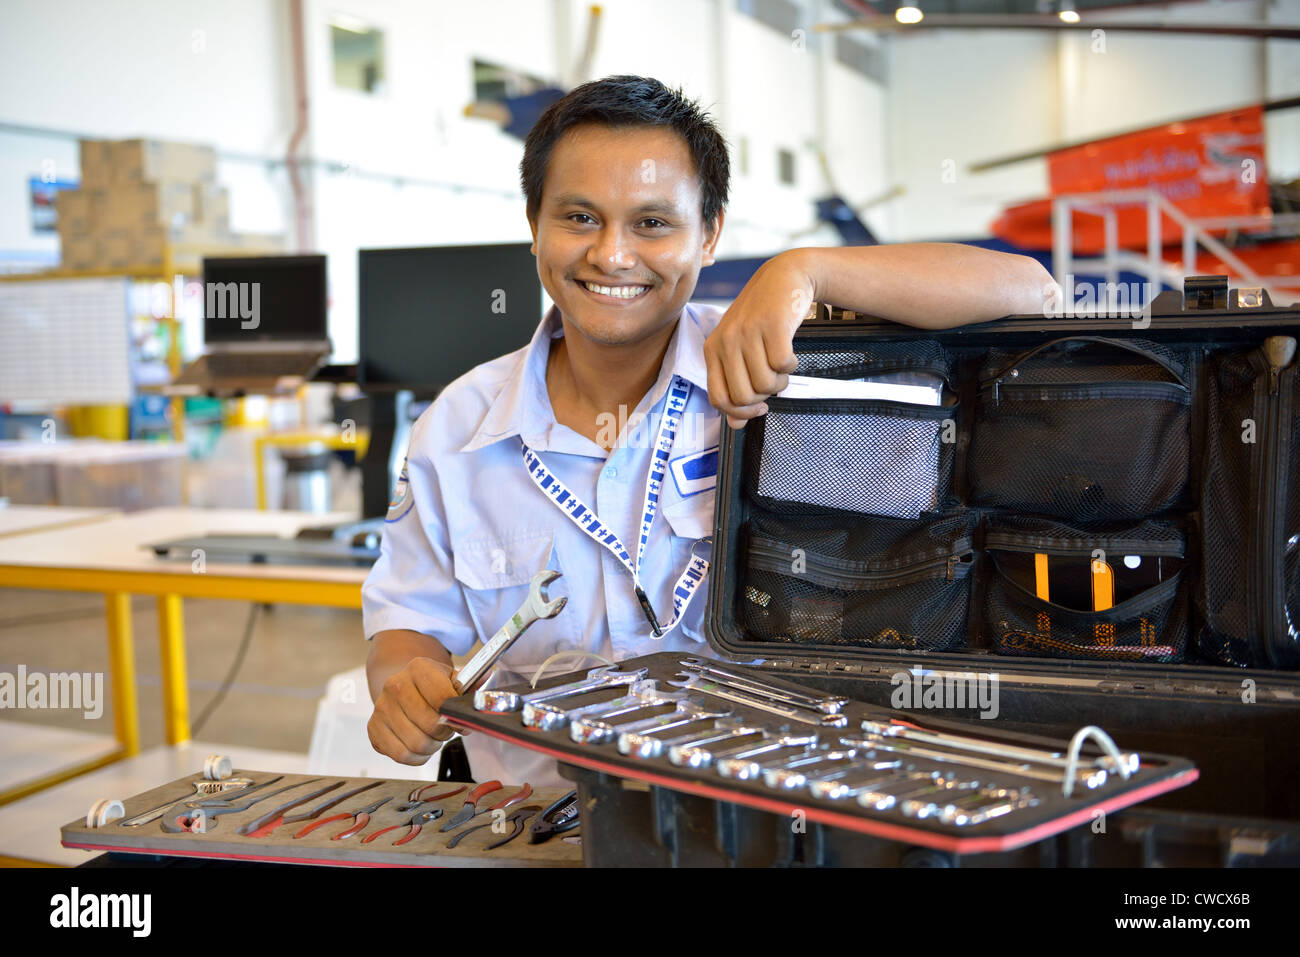 Helicopter engineer standing next to tool box is smiling and holding a wrench. Stock Photo